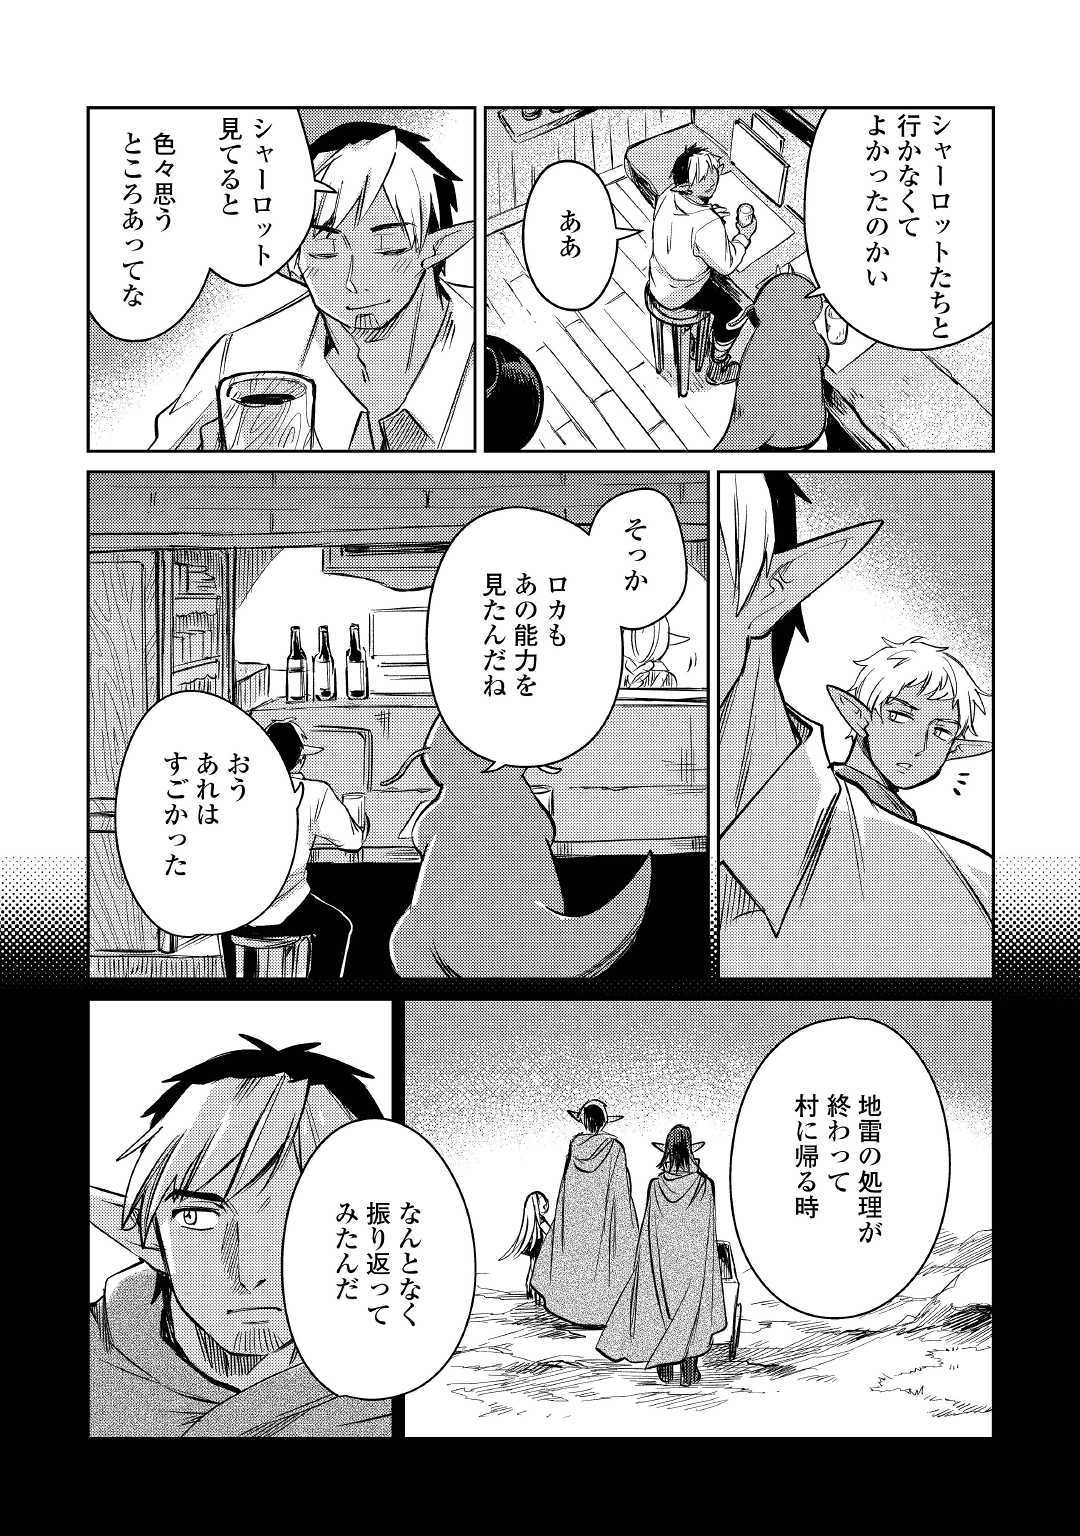 The Former Structural Researcher’s Story of Otherworldly Adventure 第21話 - Page 26